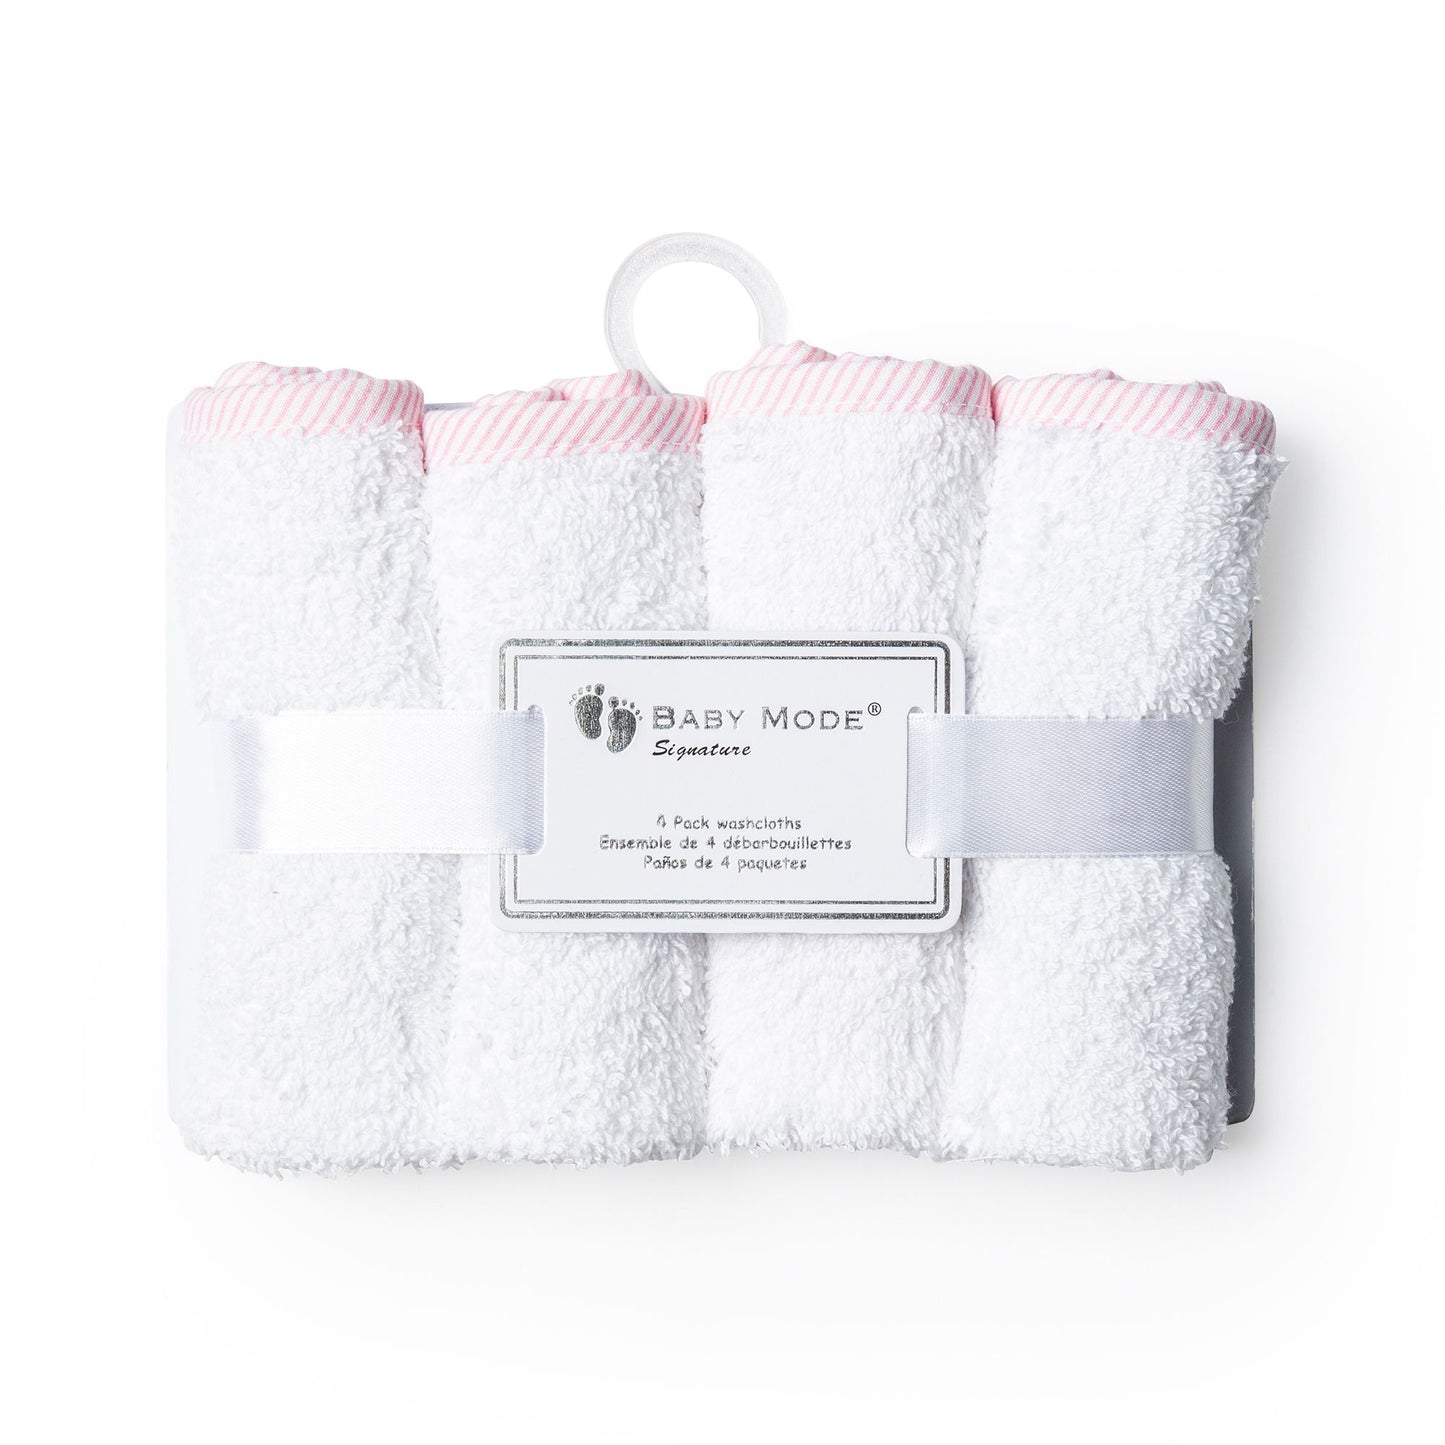 Baby's Solid Cotton Washcloths - Pink